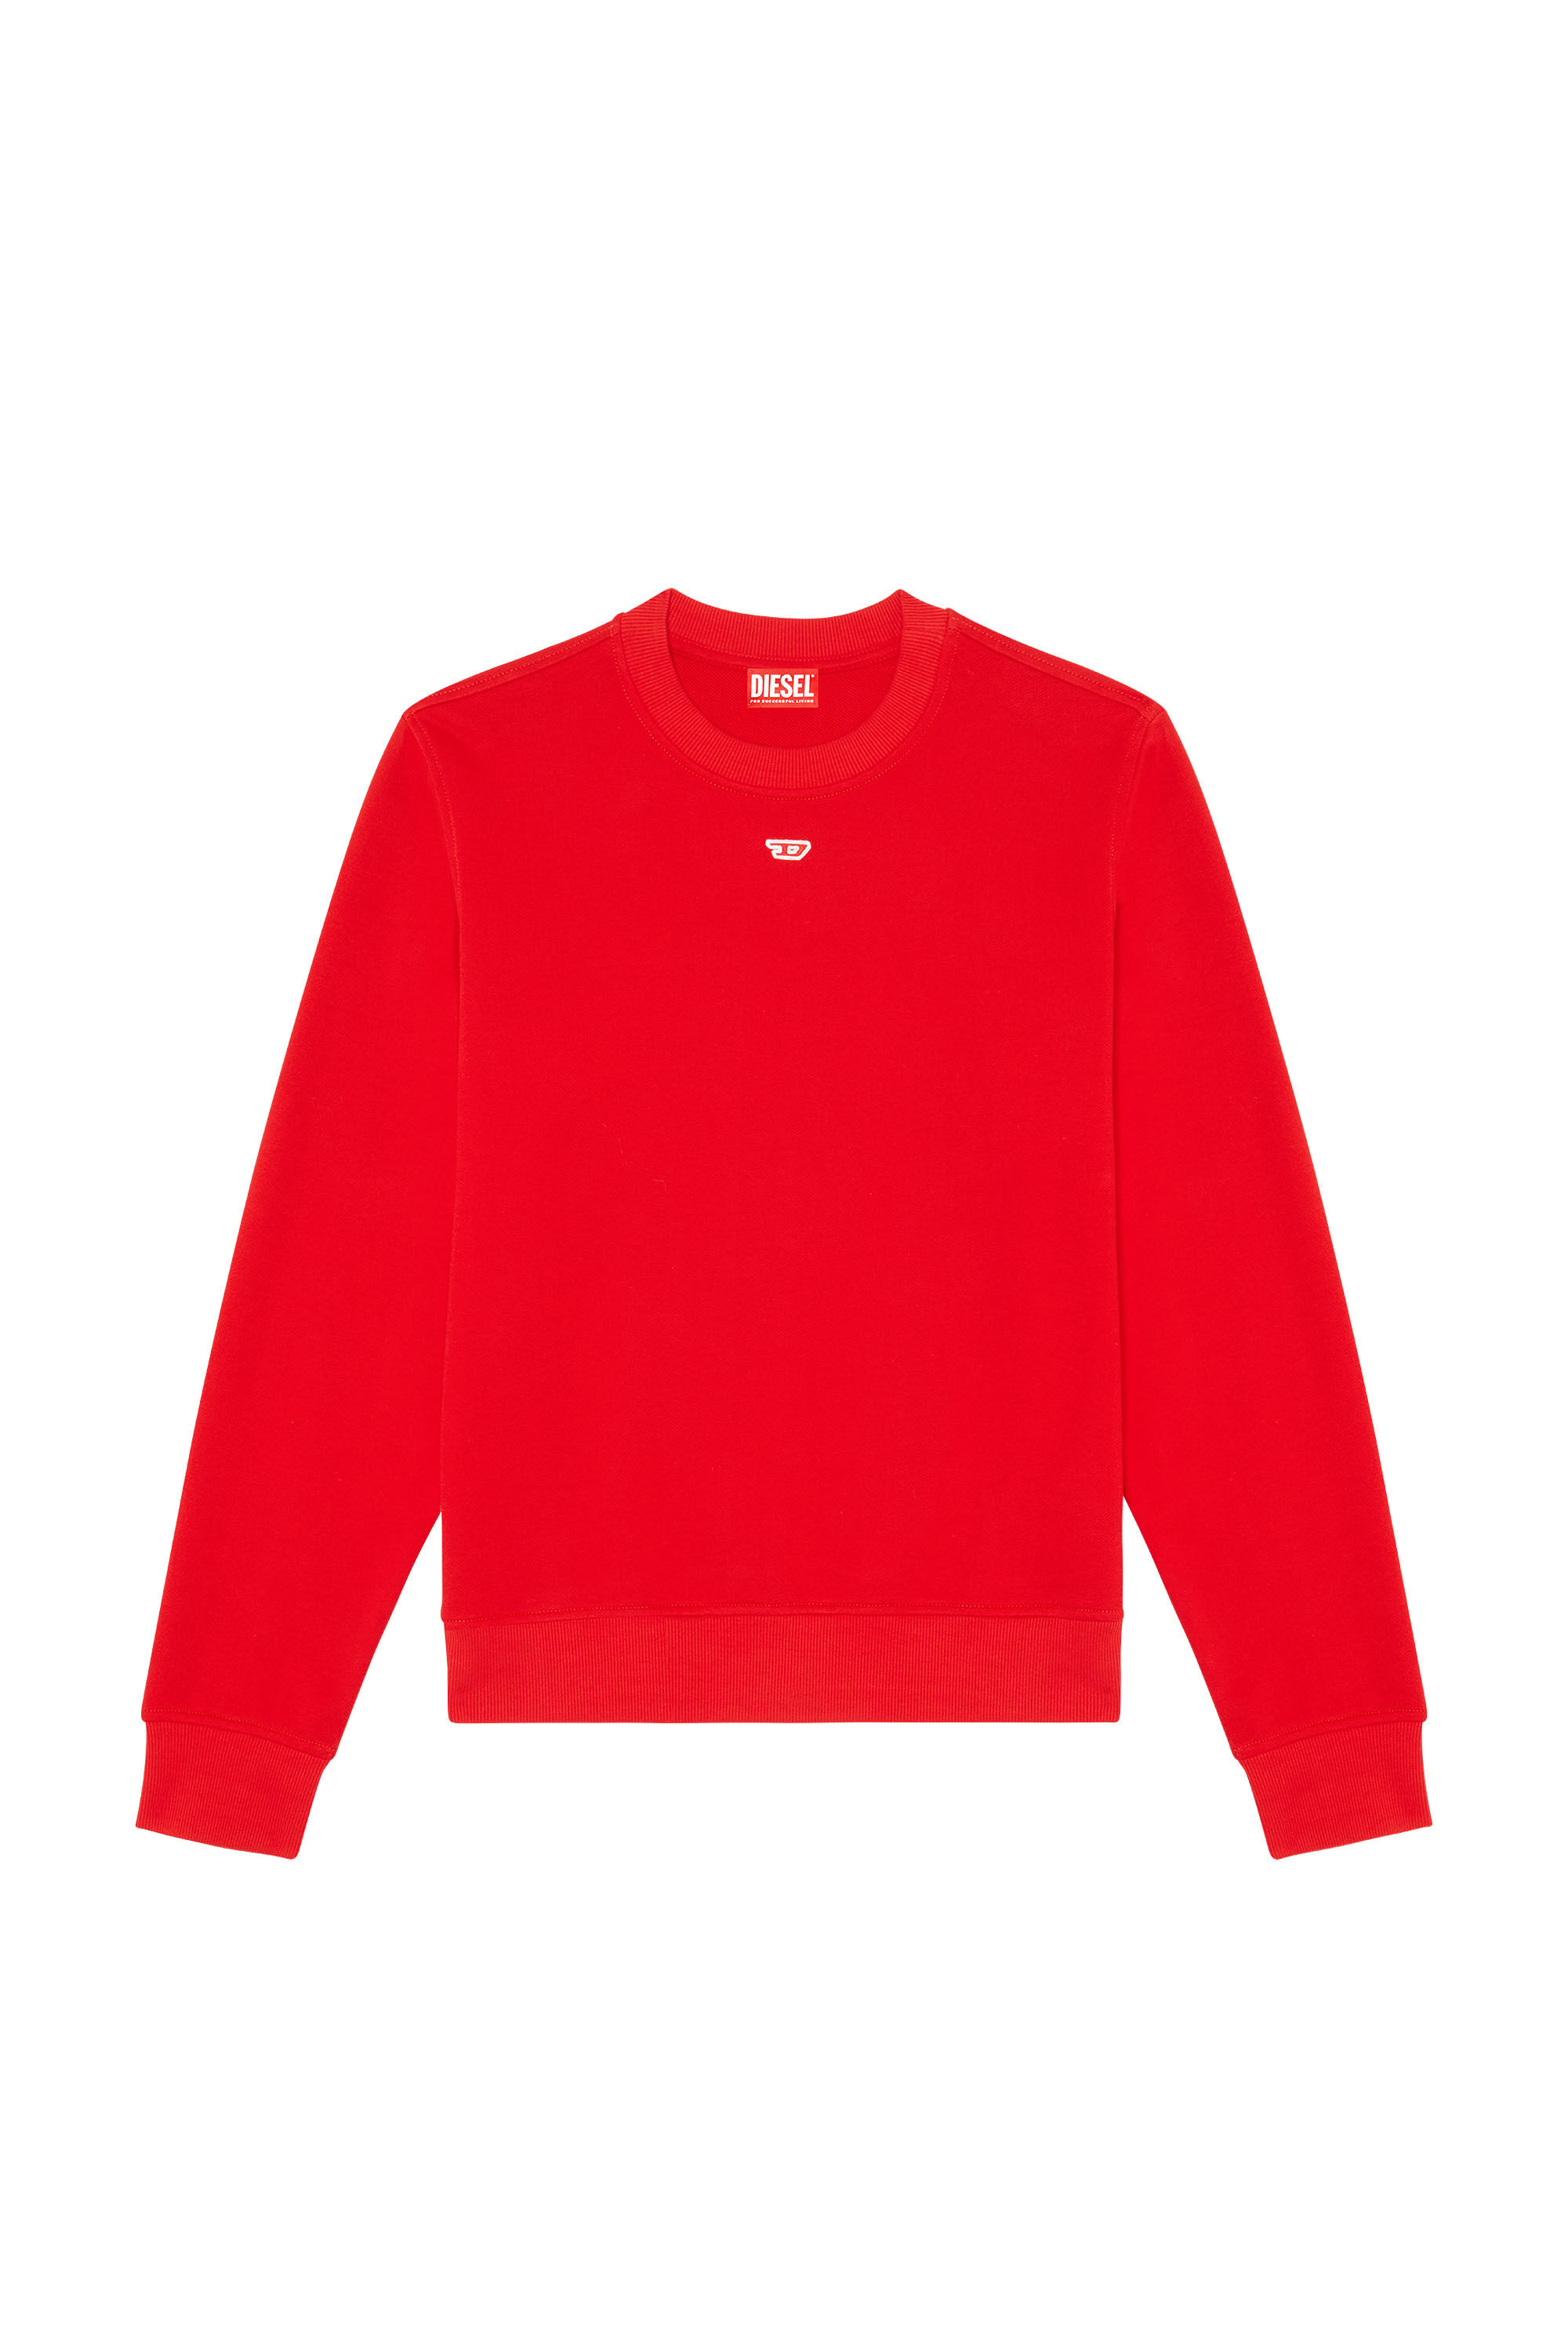 Diesel - S-GINN-D, Unisex Sweatshirt with mini D patch in Red - Image 2